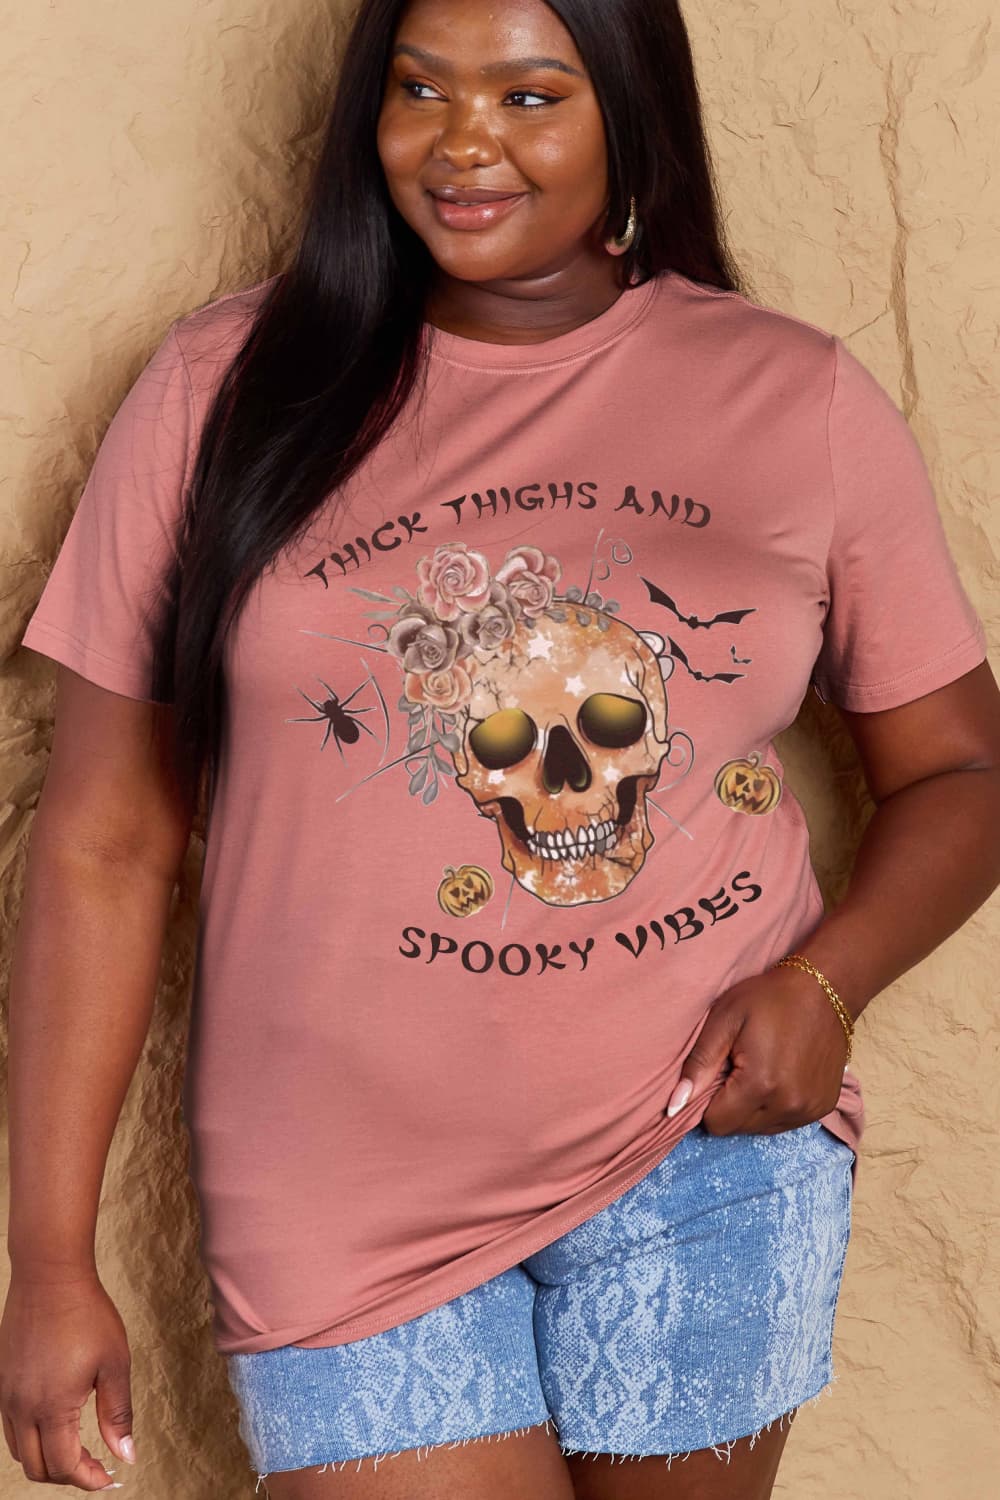 Simply Love Full Size THICK THIGHS AND SPOOKY VIBES Graphic Cotton T-Shirt